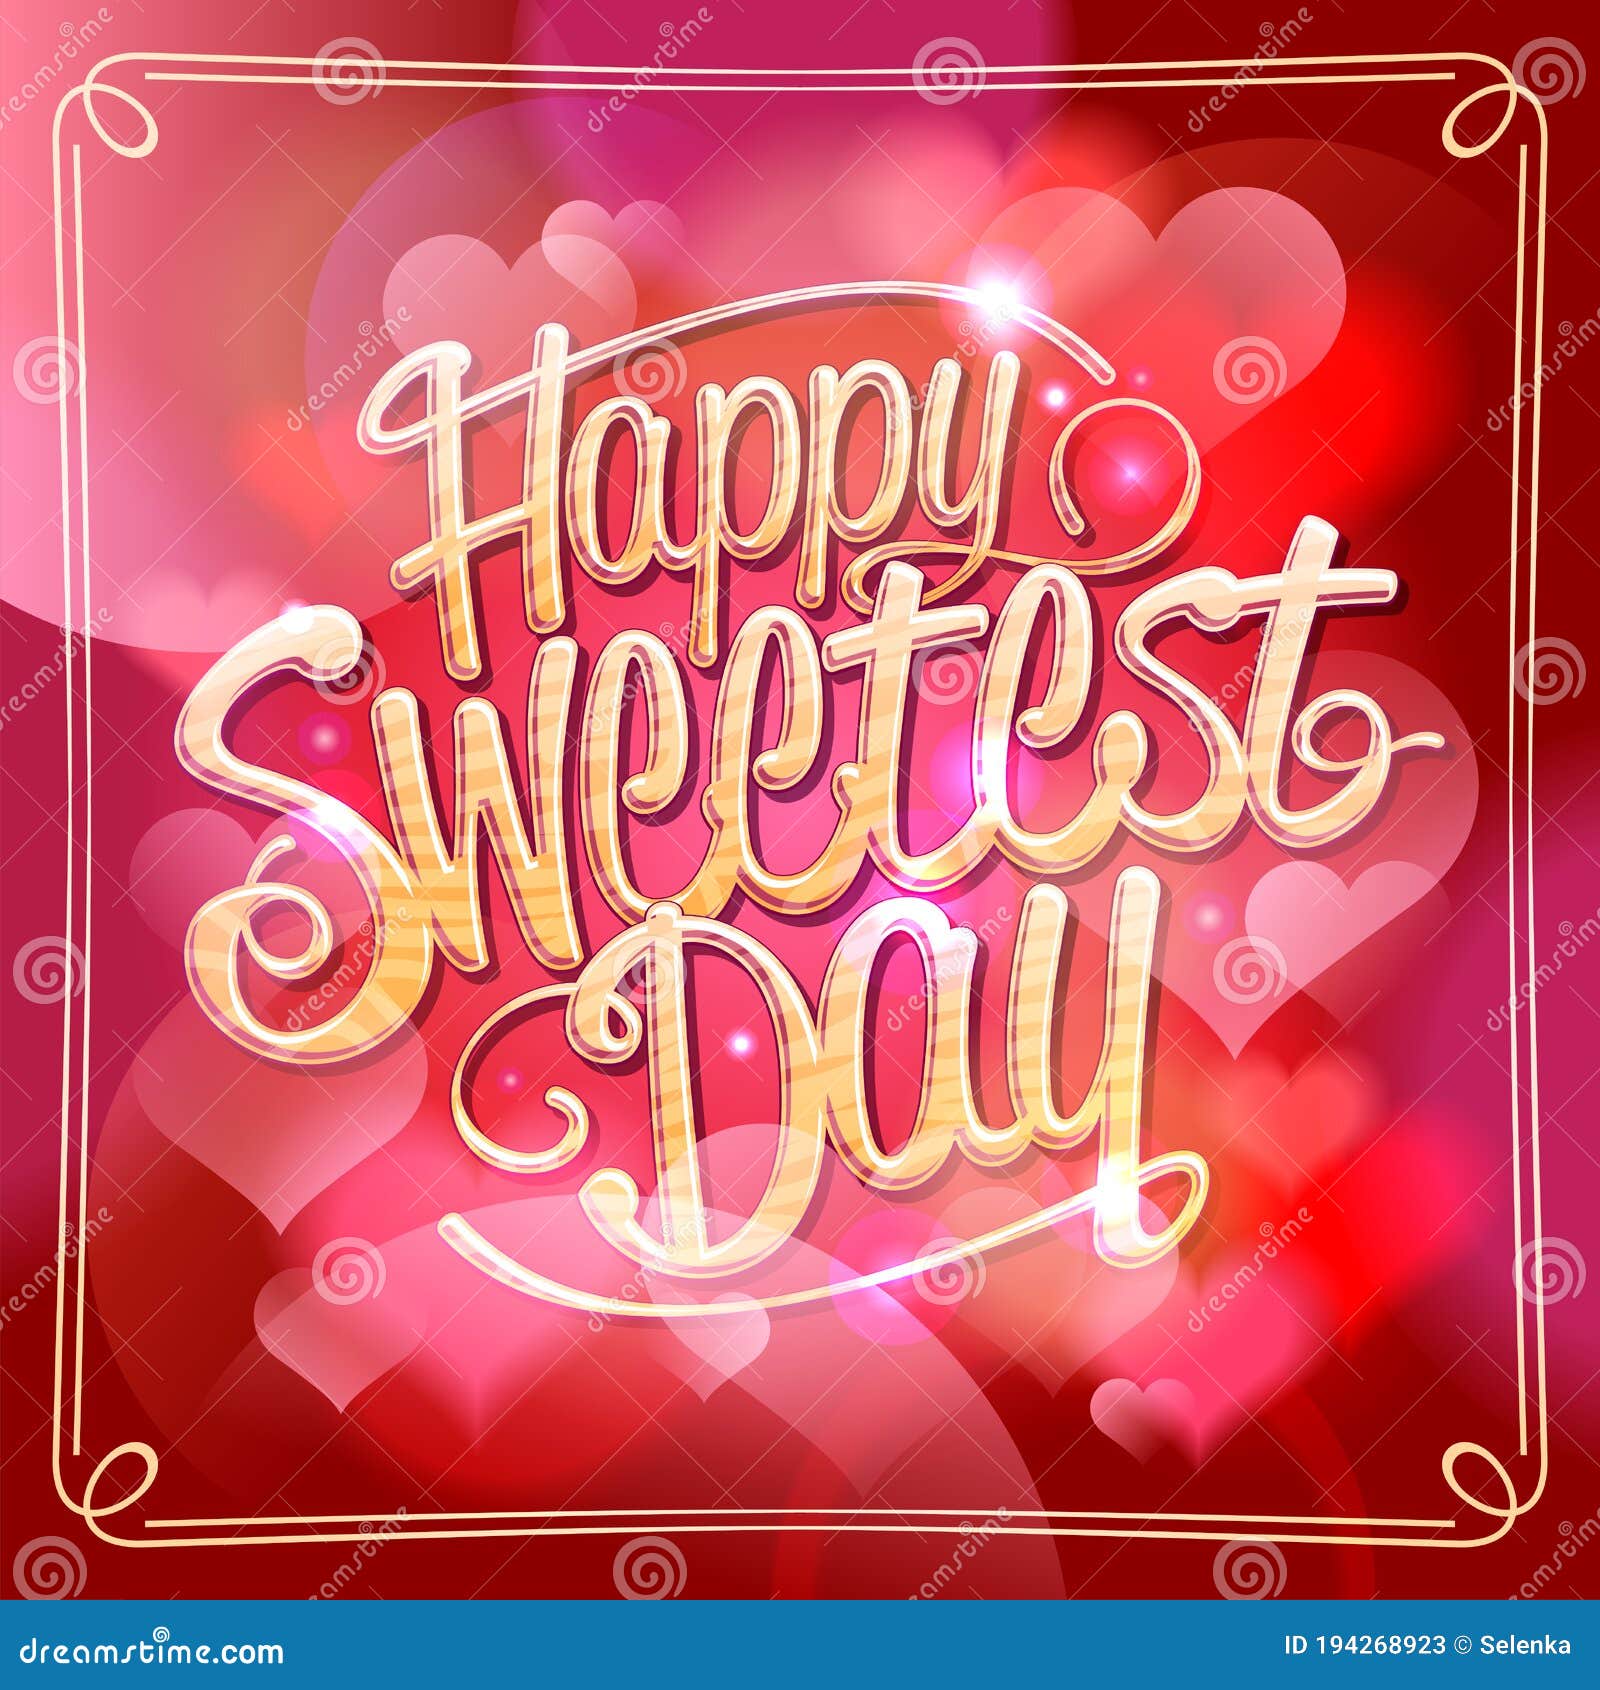 Happy Sweetest Day Banner With Sweets Vector Illustration